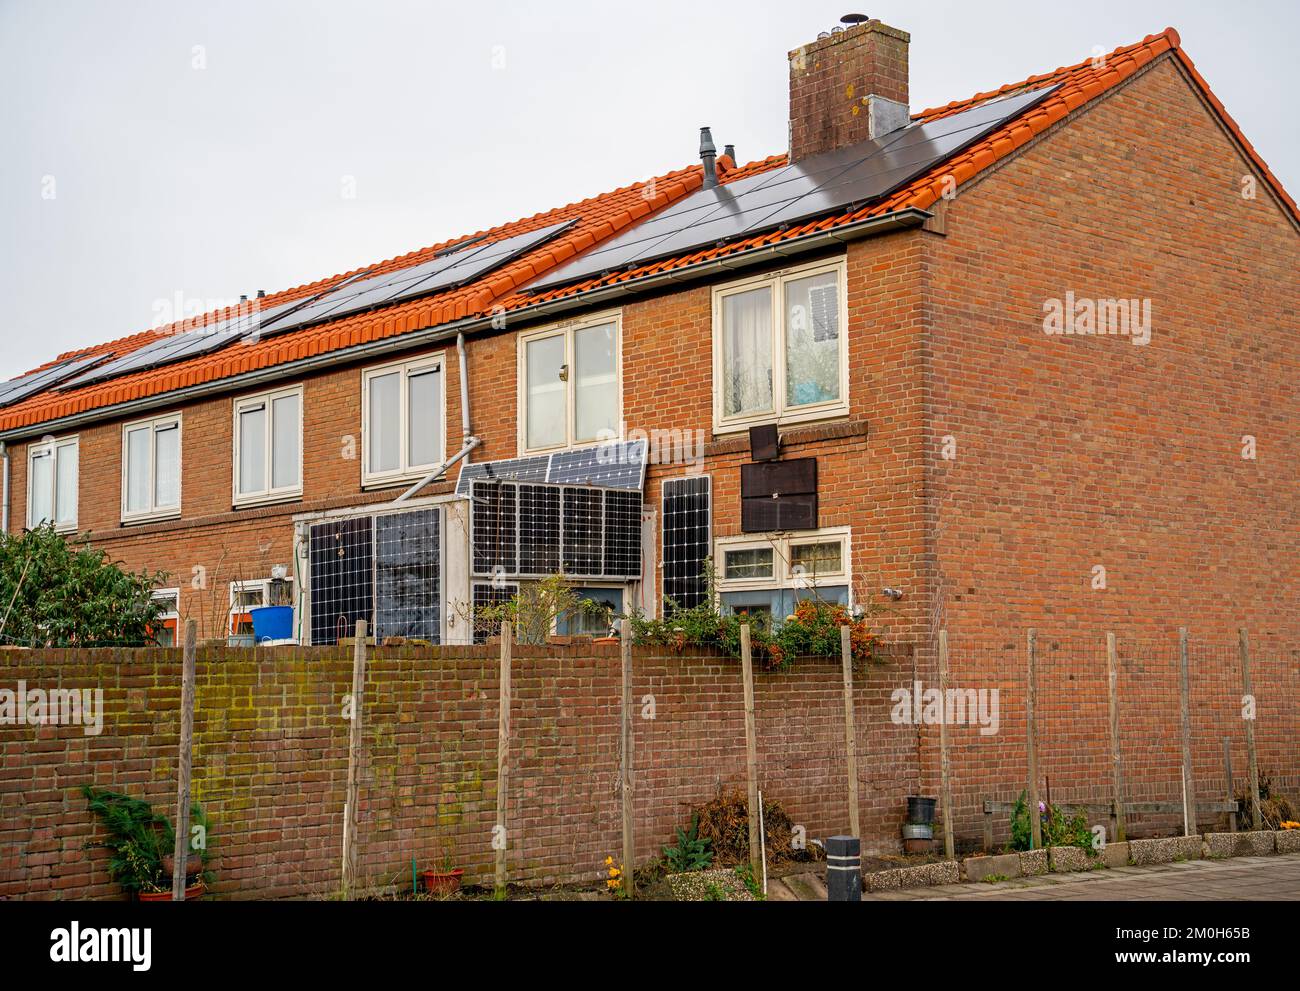 Houses with large collection of solar panels Stock Photo